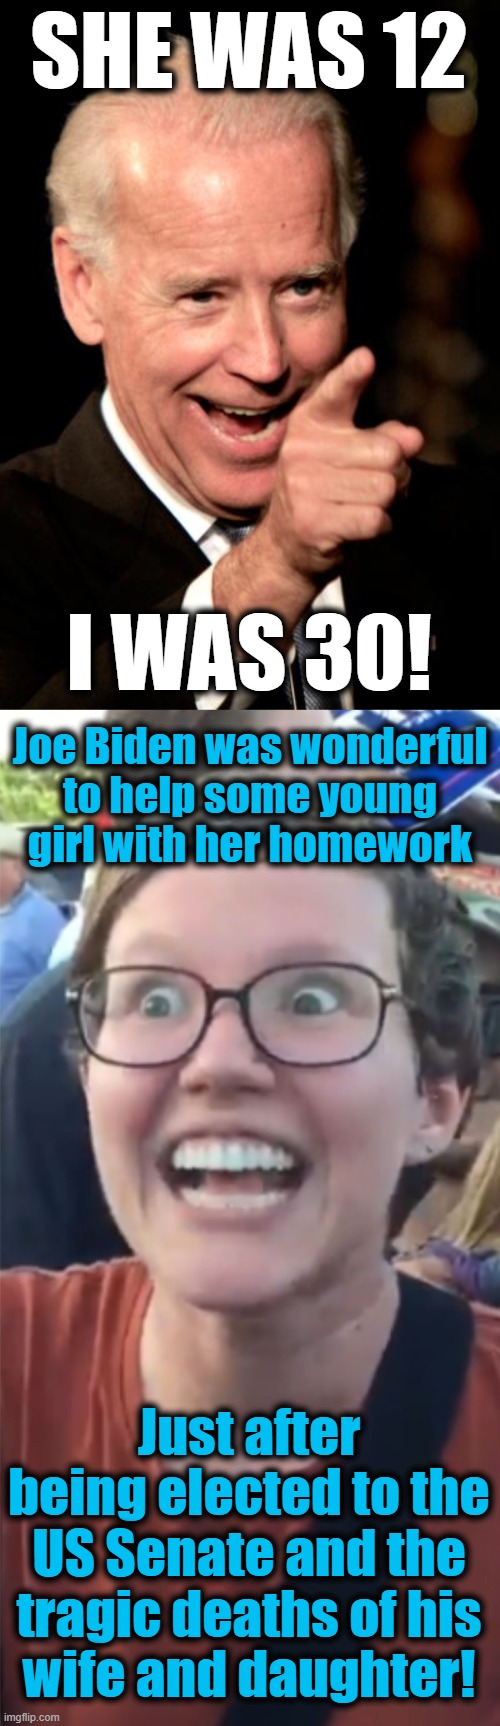 Yeah, that must have been it | SHE WAS 12; I WAS 30! Joe Biden was wonderful
to help some young
girl with her homework; Just after being elected to the US Senate and the tragic deaths of his
wife and daughter! | image tagged in memes,smilin biden,social justice warrior hypocrisy,she was 12 i was 30,joe biden,pedophile | made w/ Imgflip meme maker